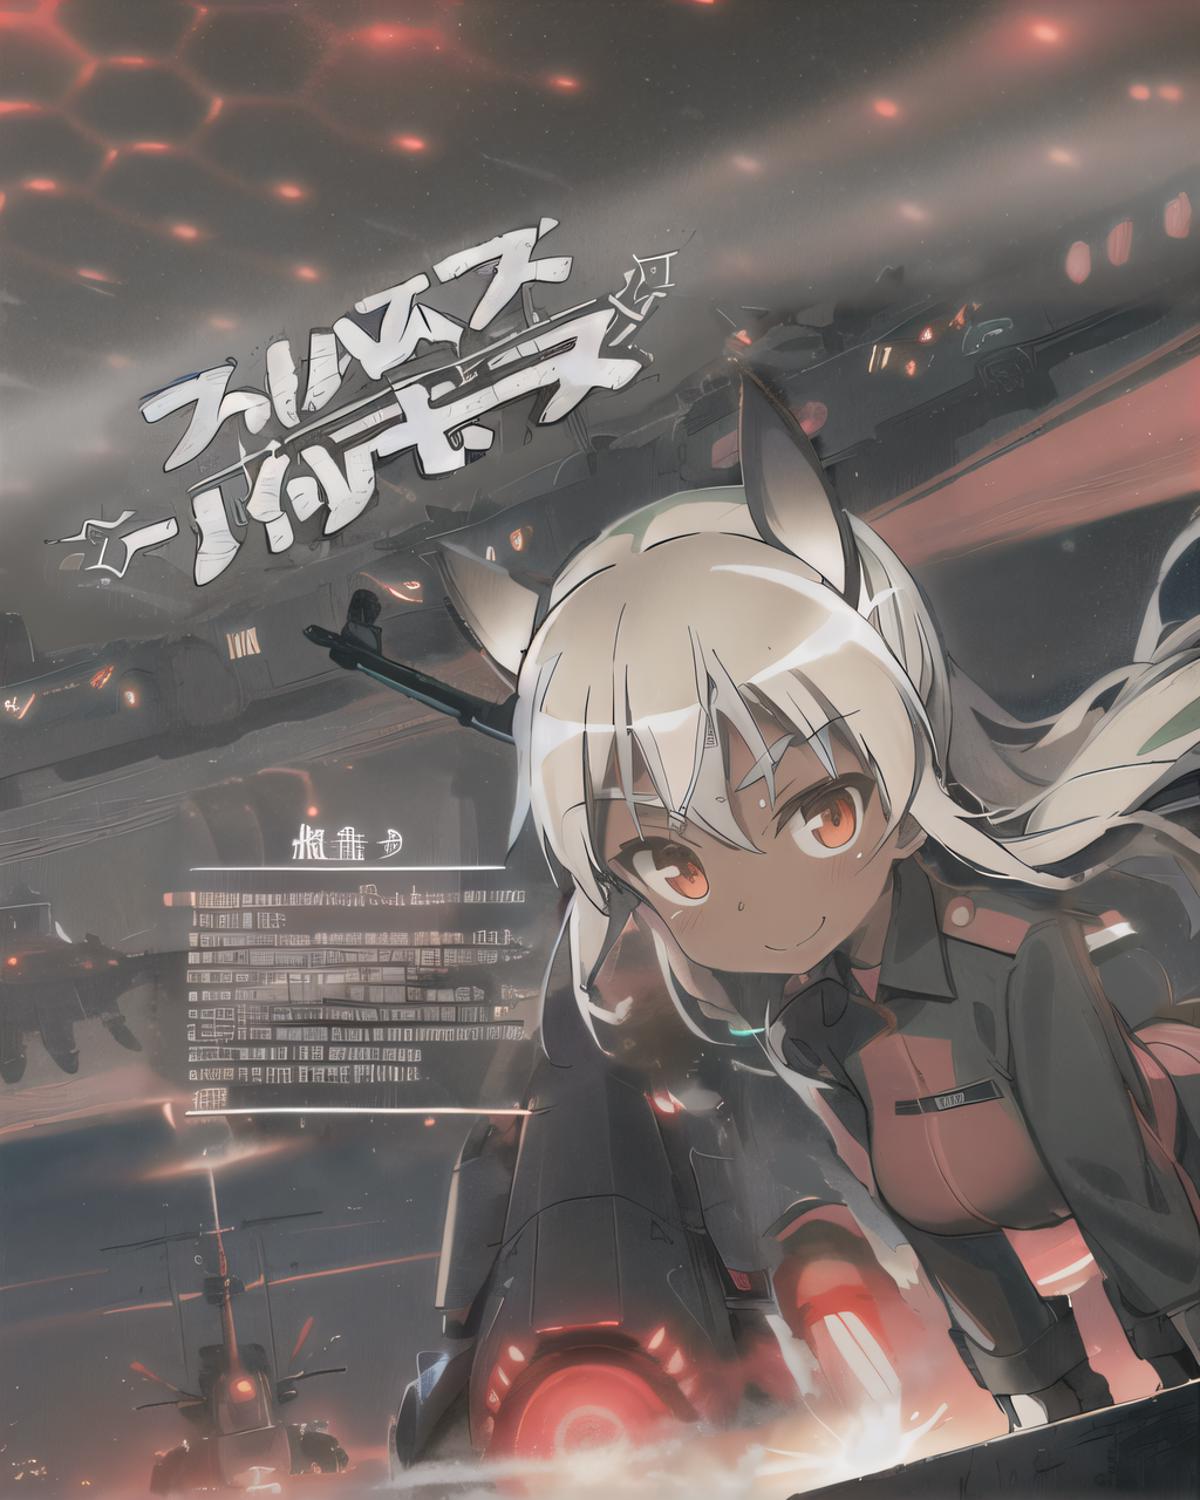 Strike Witches image by akq